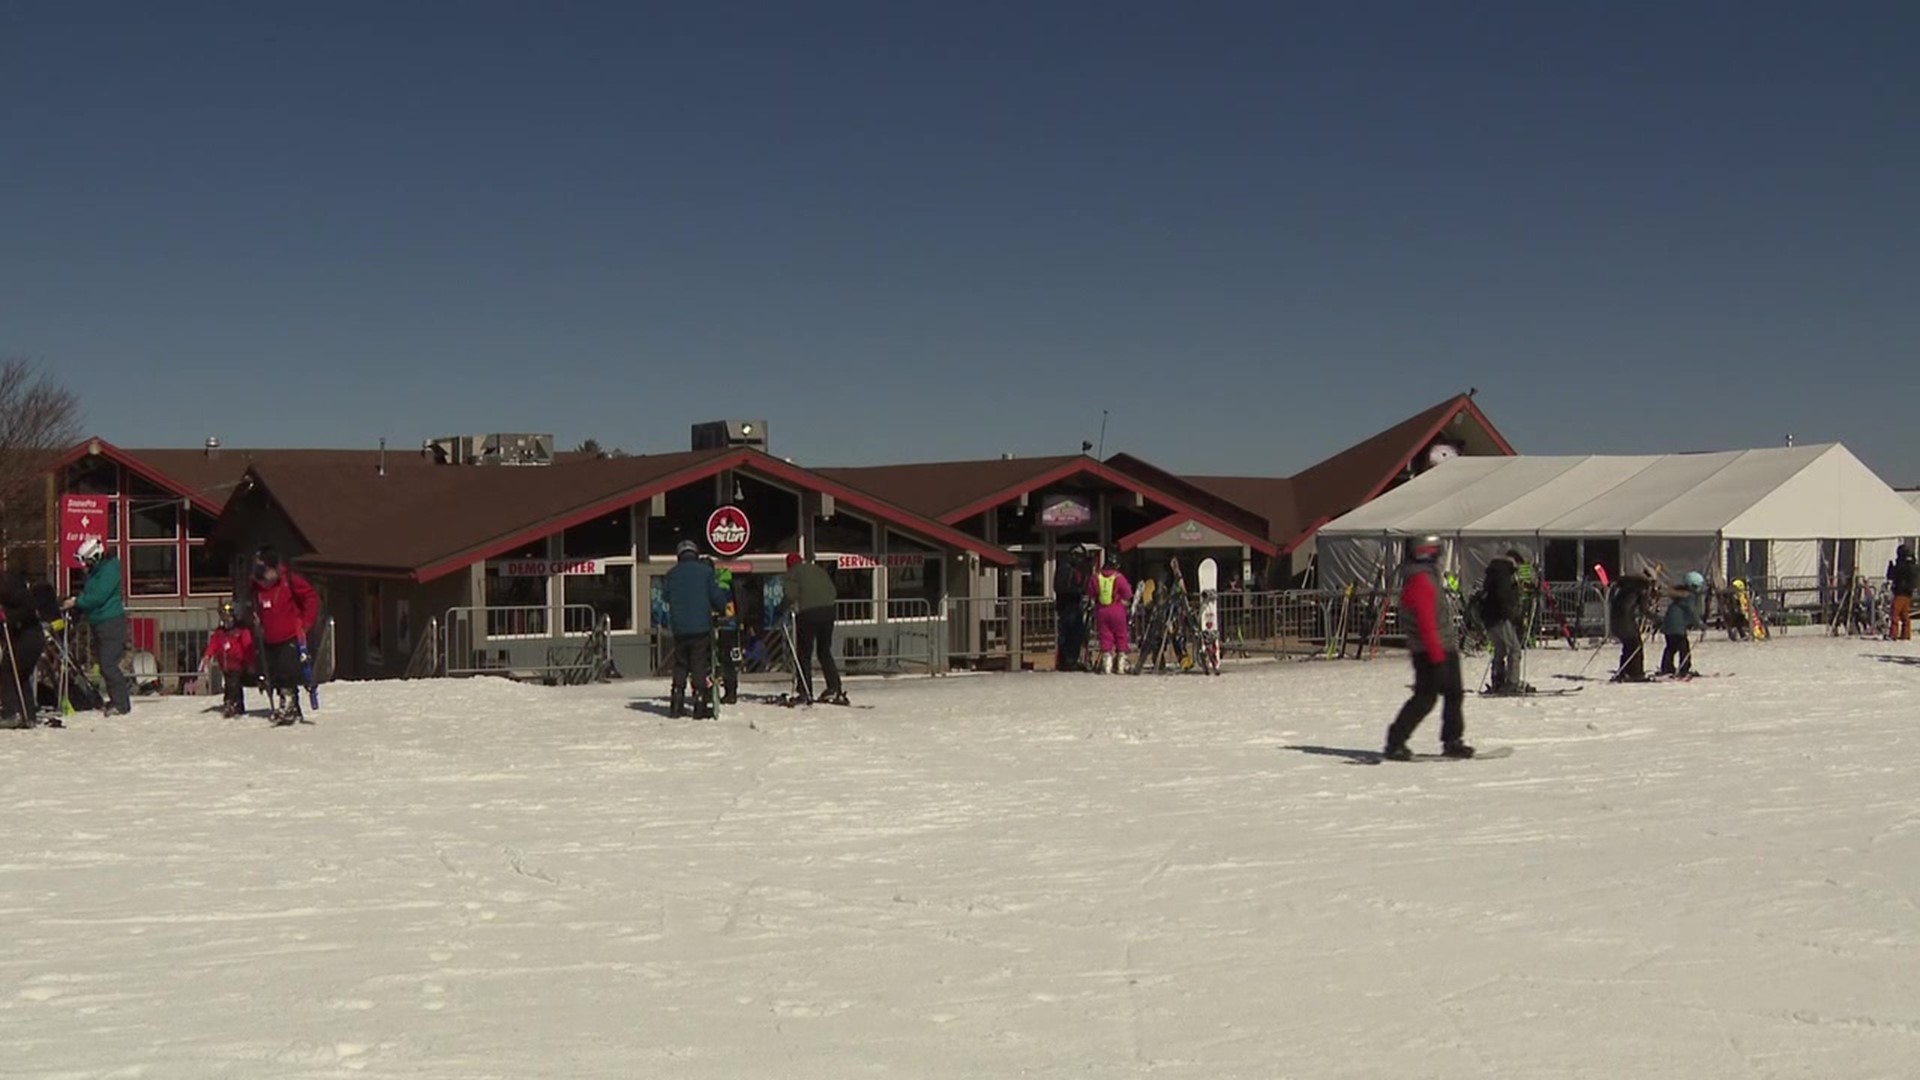 Camelback Resort is making winter last, but the place near Tannersville has to start thinking summer, soon.